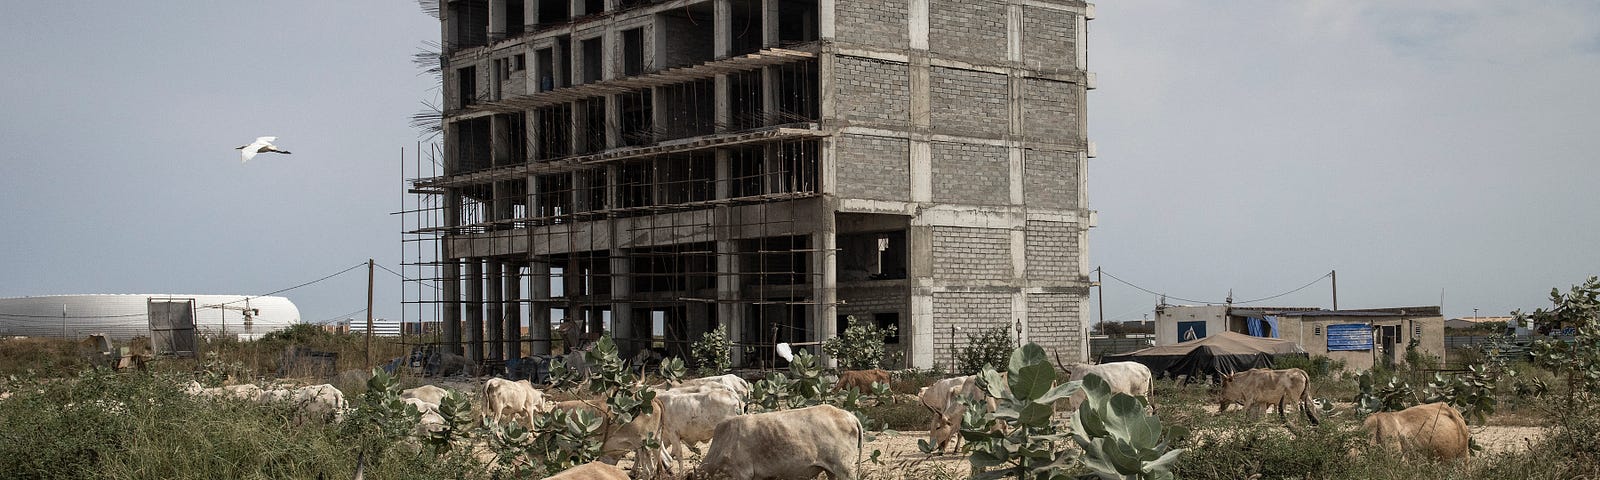 A six-story building appears to be under construction surrounded by a herd of cows in a field of low bushes.